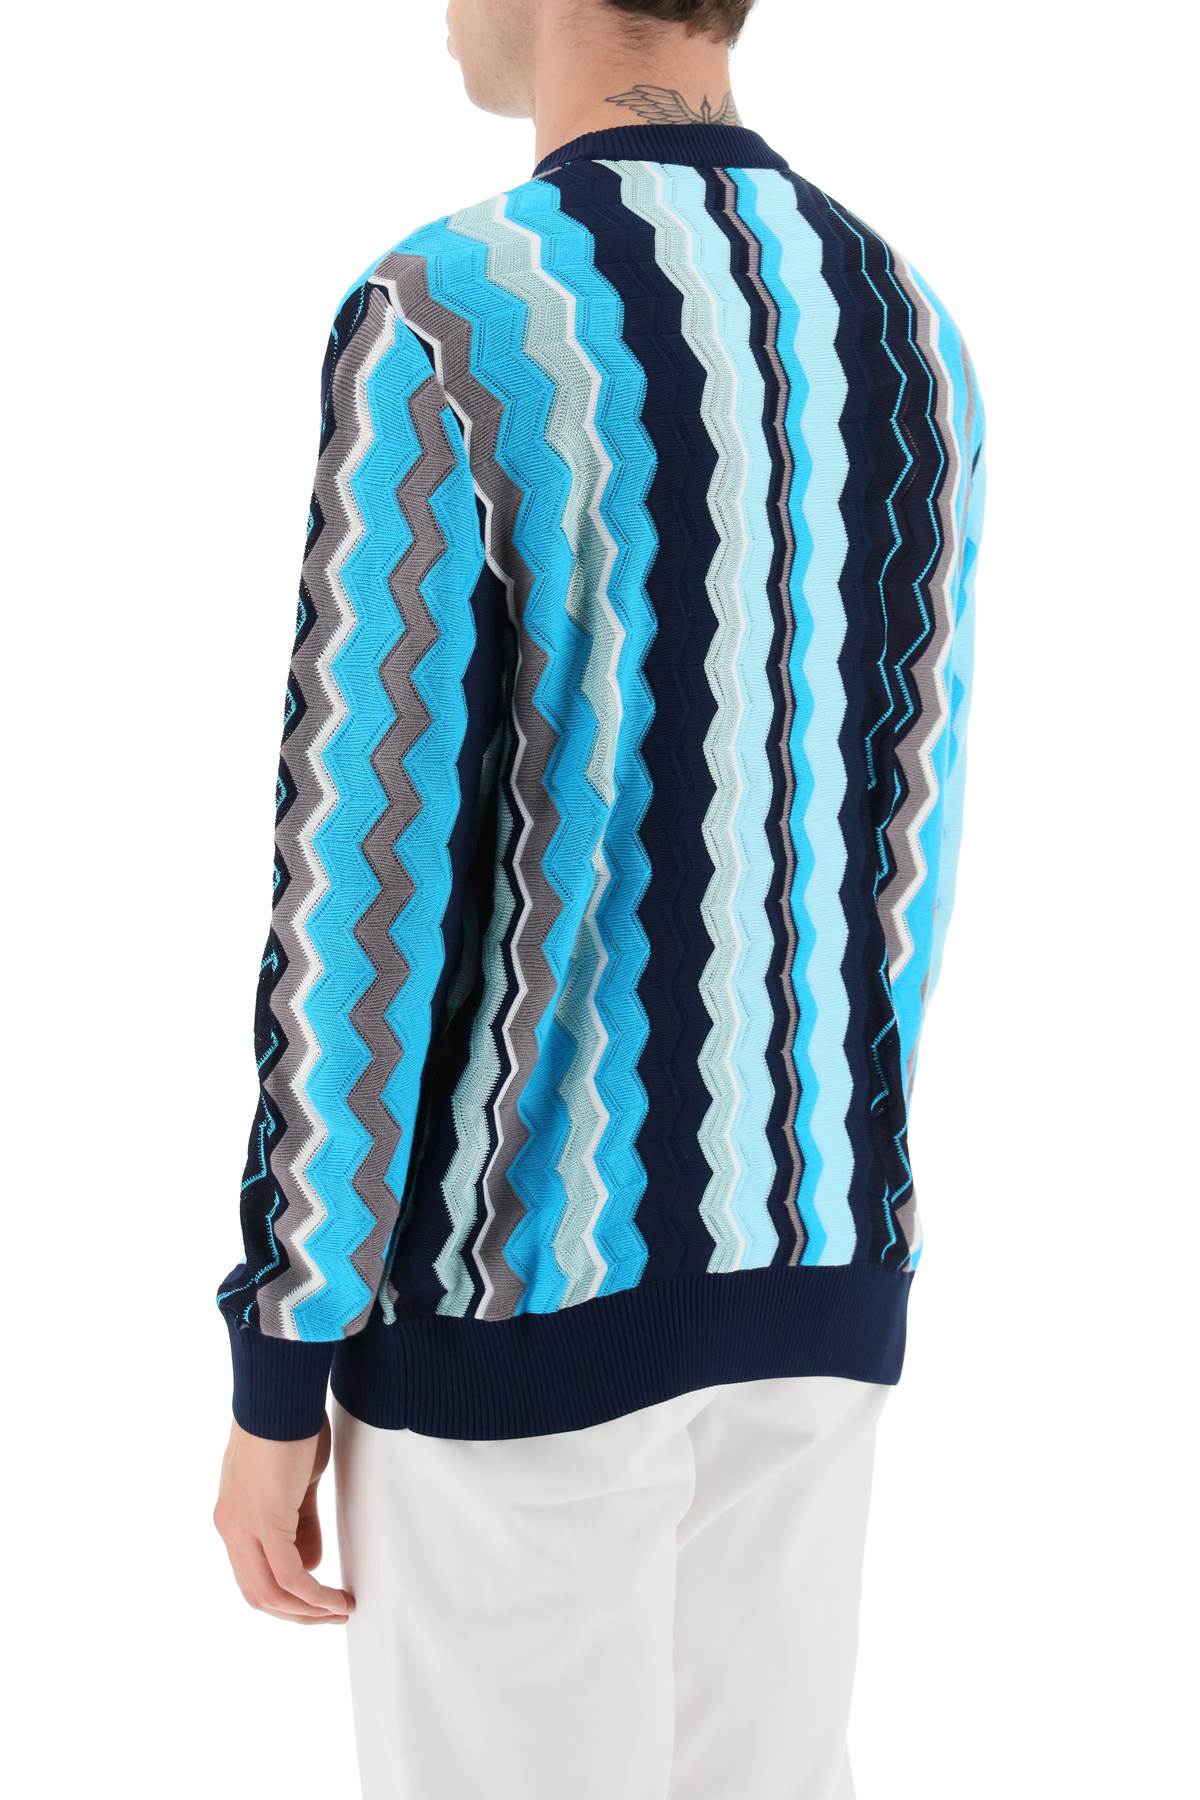 Shop Missoni Zigzag Sweater In White And Blue Tones (blue)